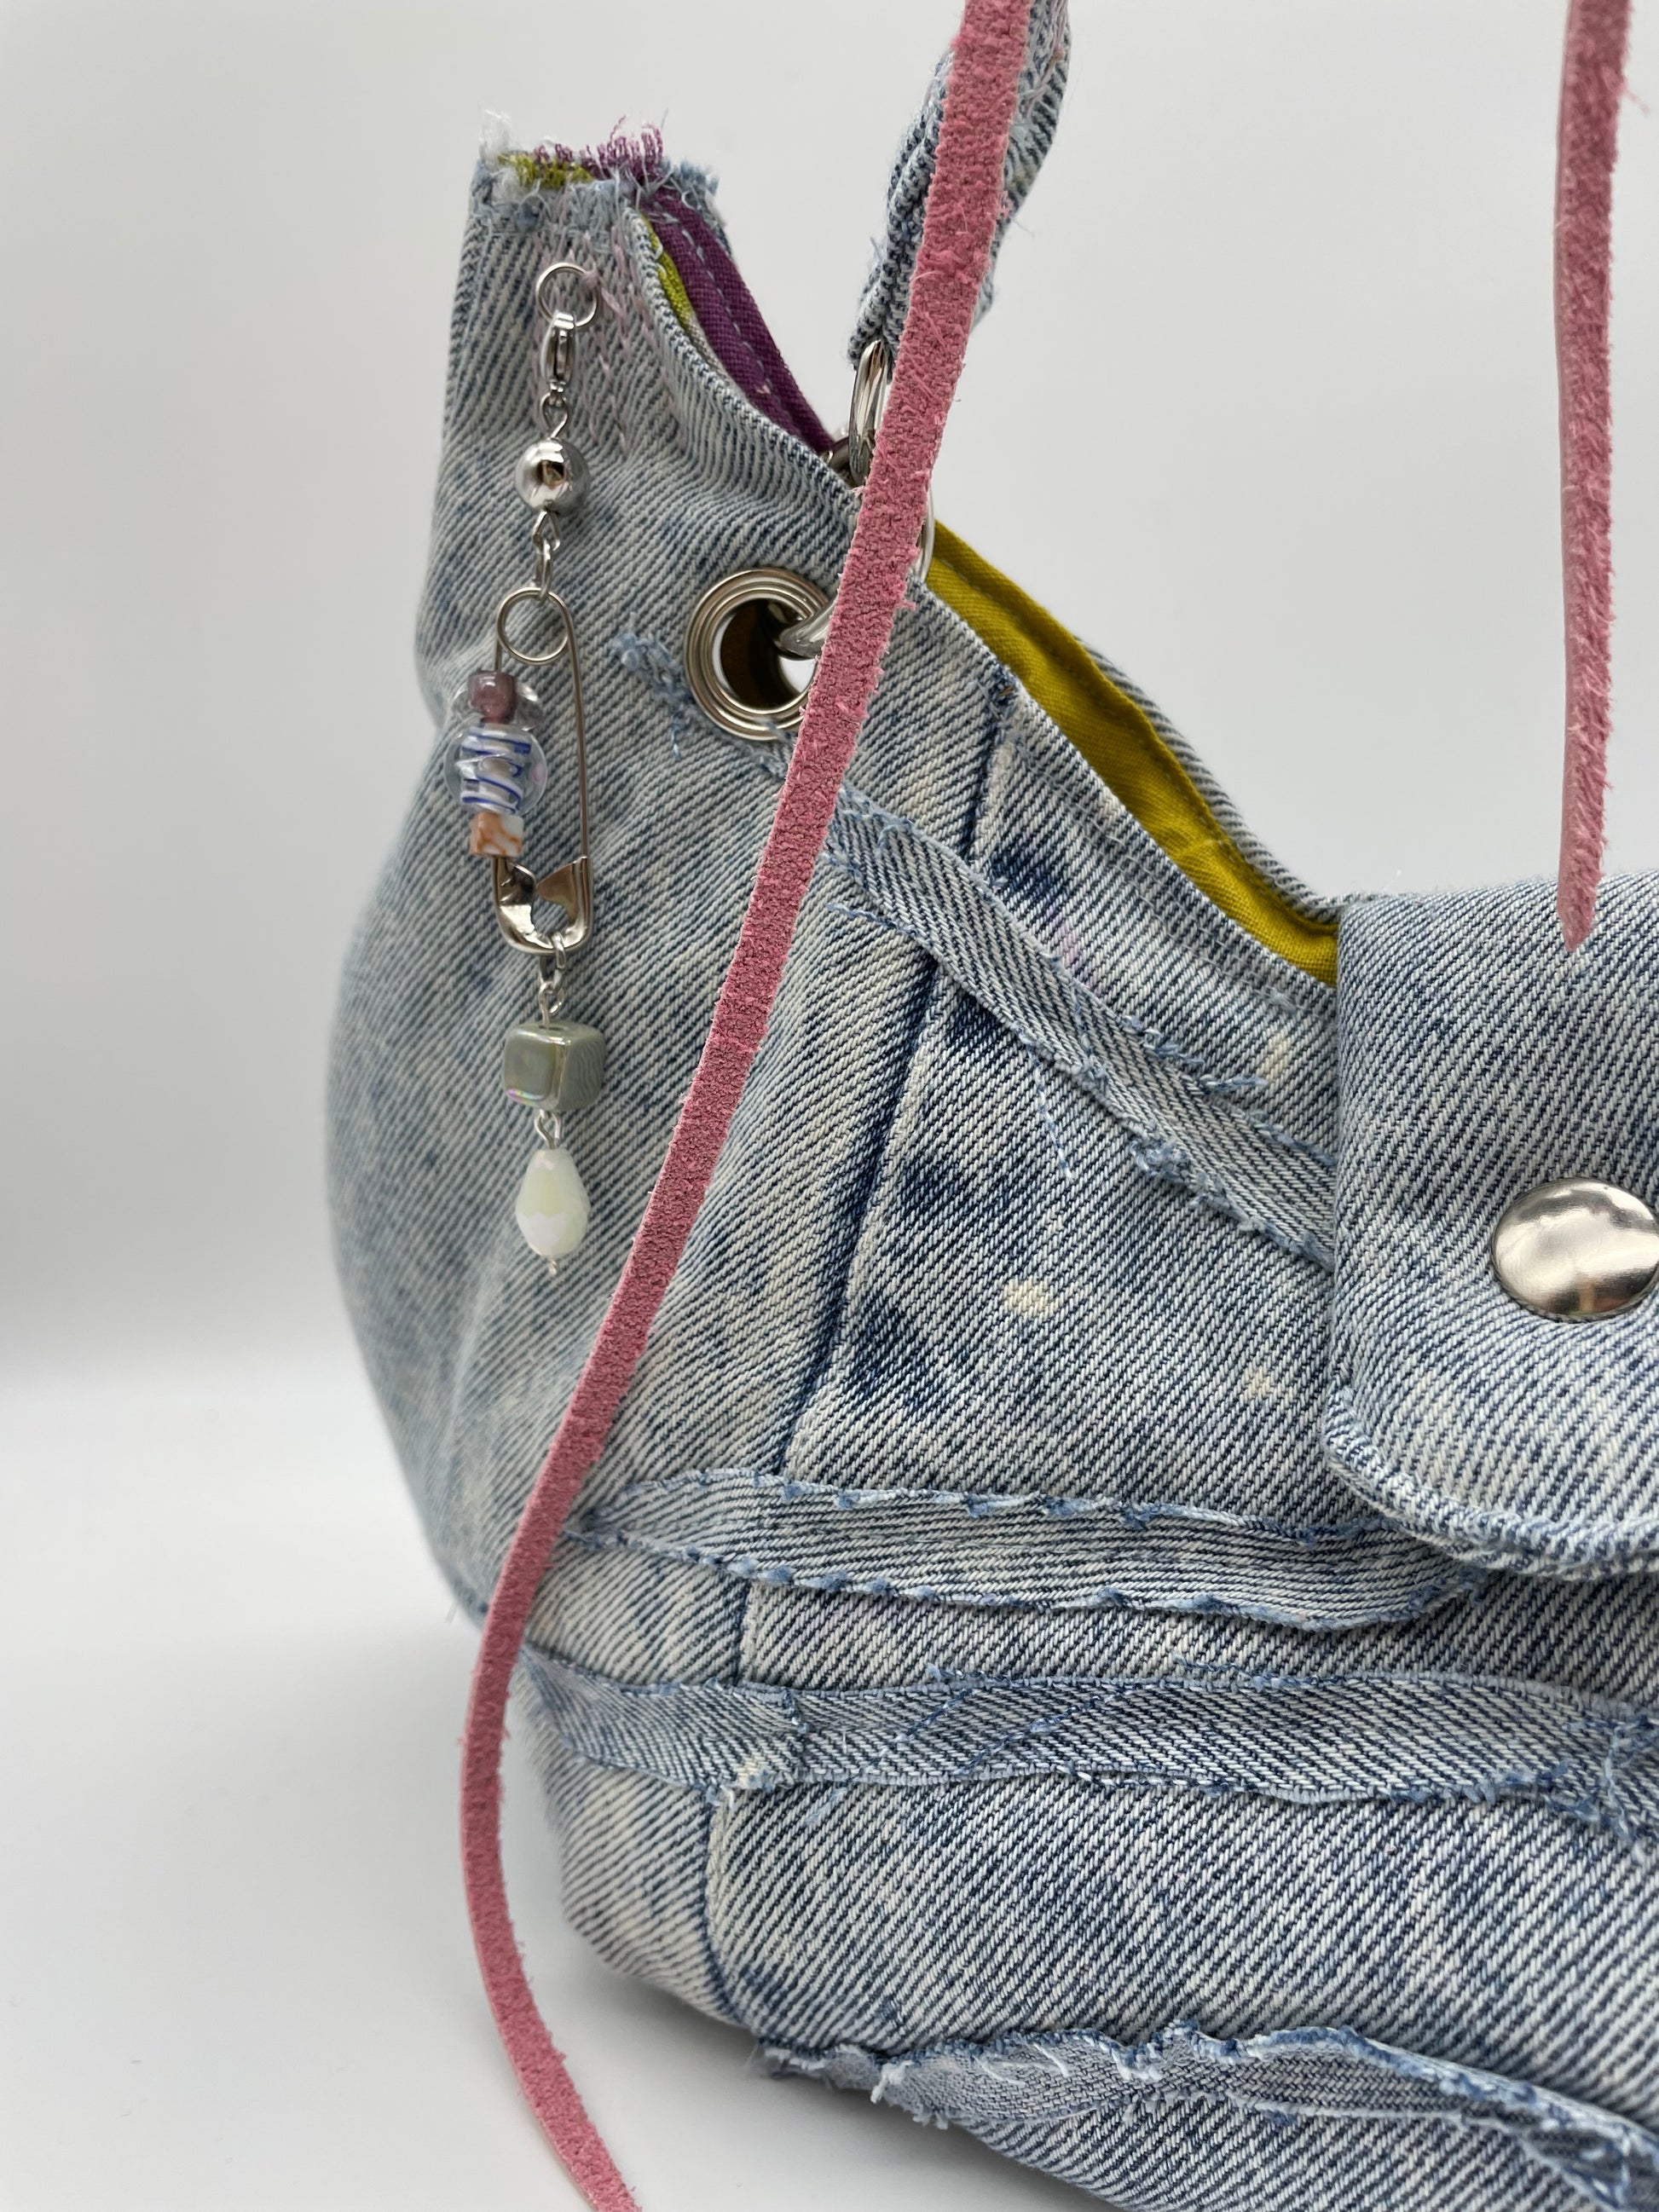 Upcycling bag washed out denim bag beads chain jeans bag scrunchy wavey padded batman